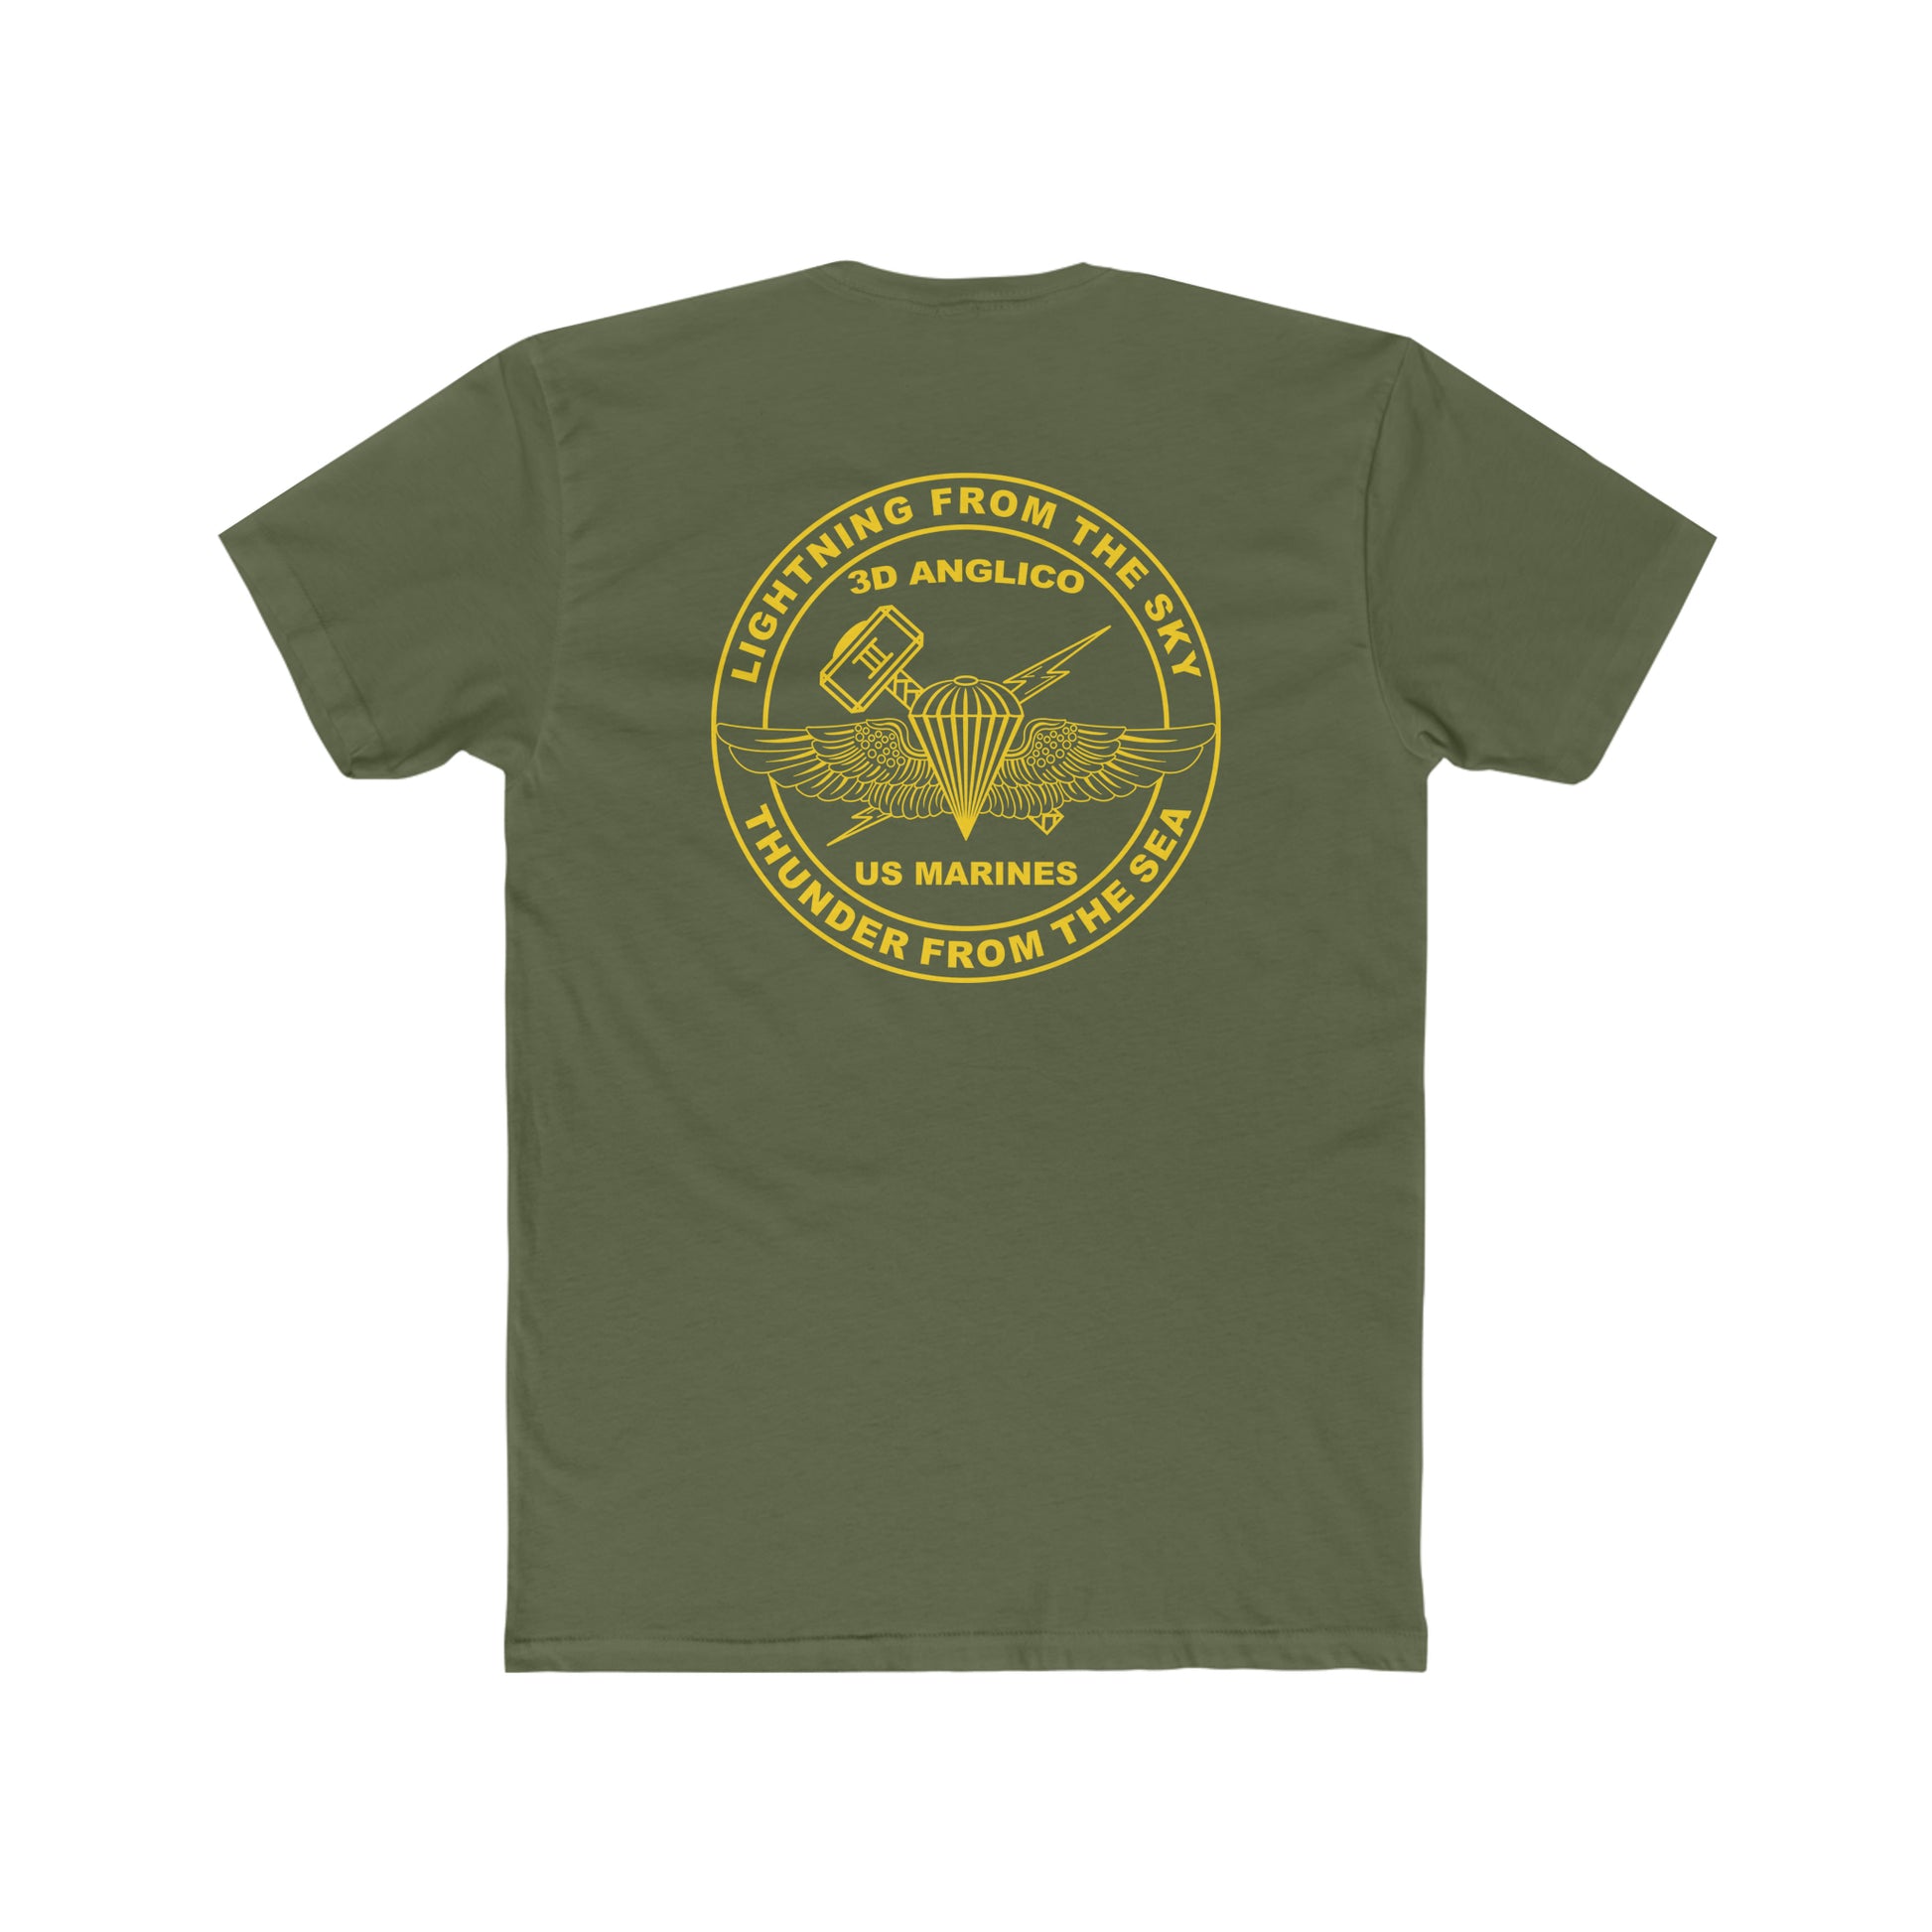 military green 3rd ANGLICO T-shirt